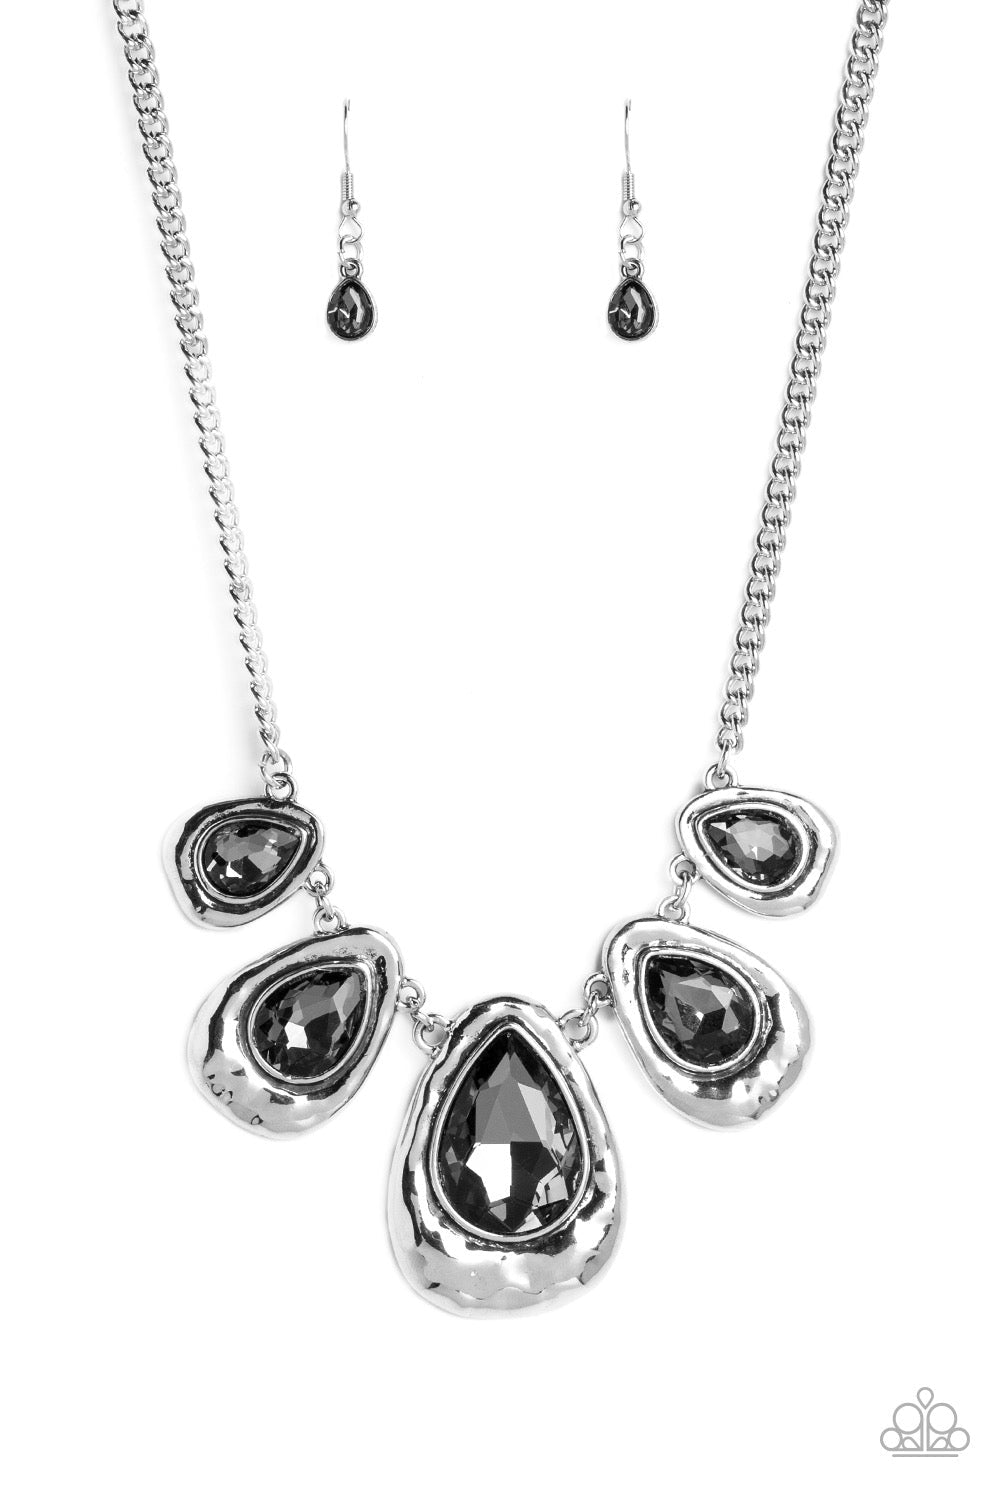 Paparazzi Formally Forged - Silver Necklace Paparazzi Jewelry Images 